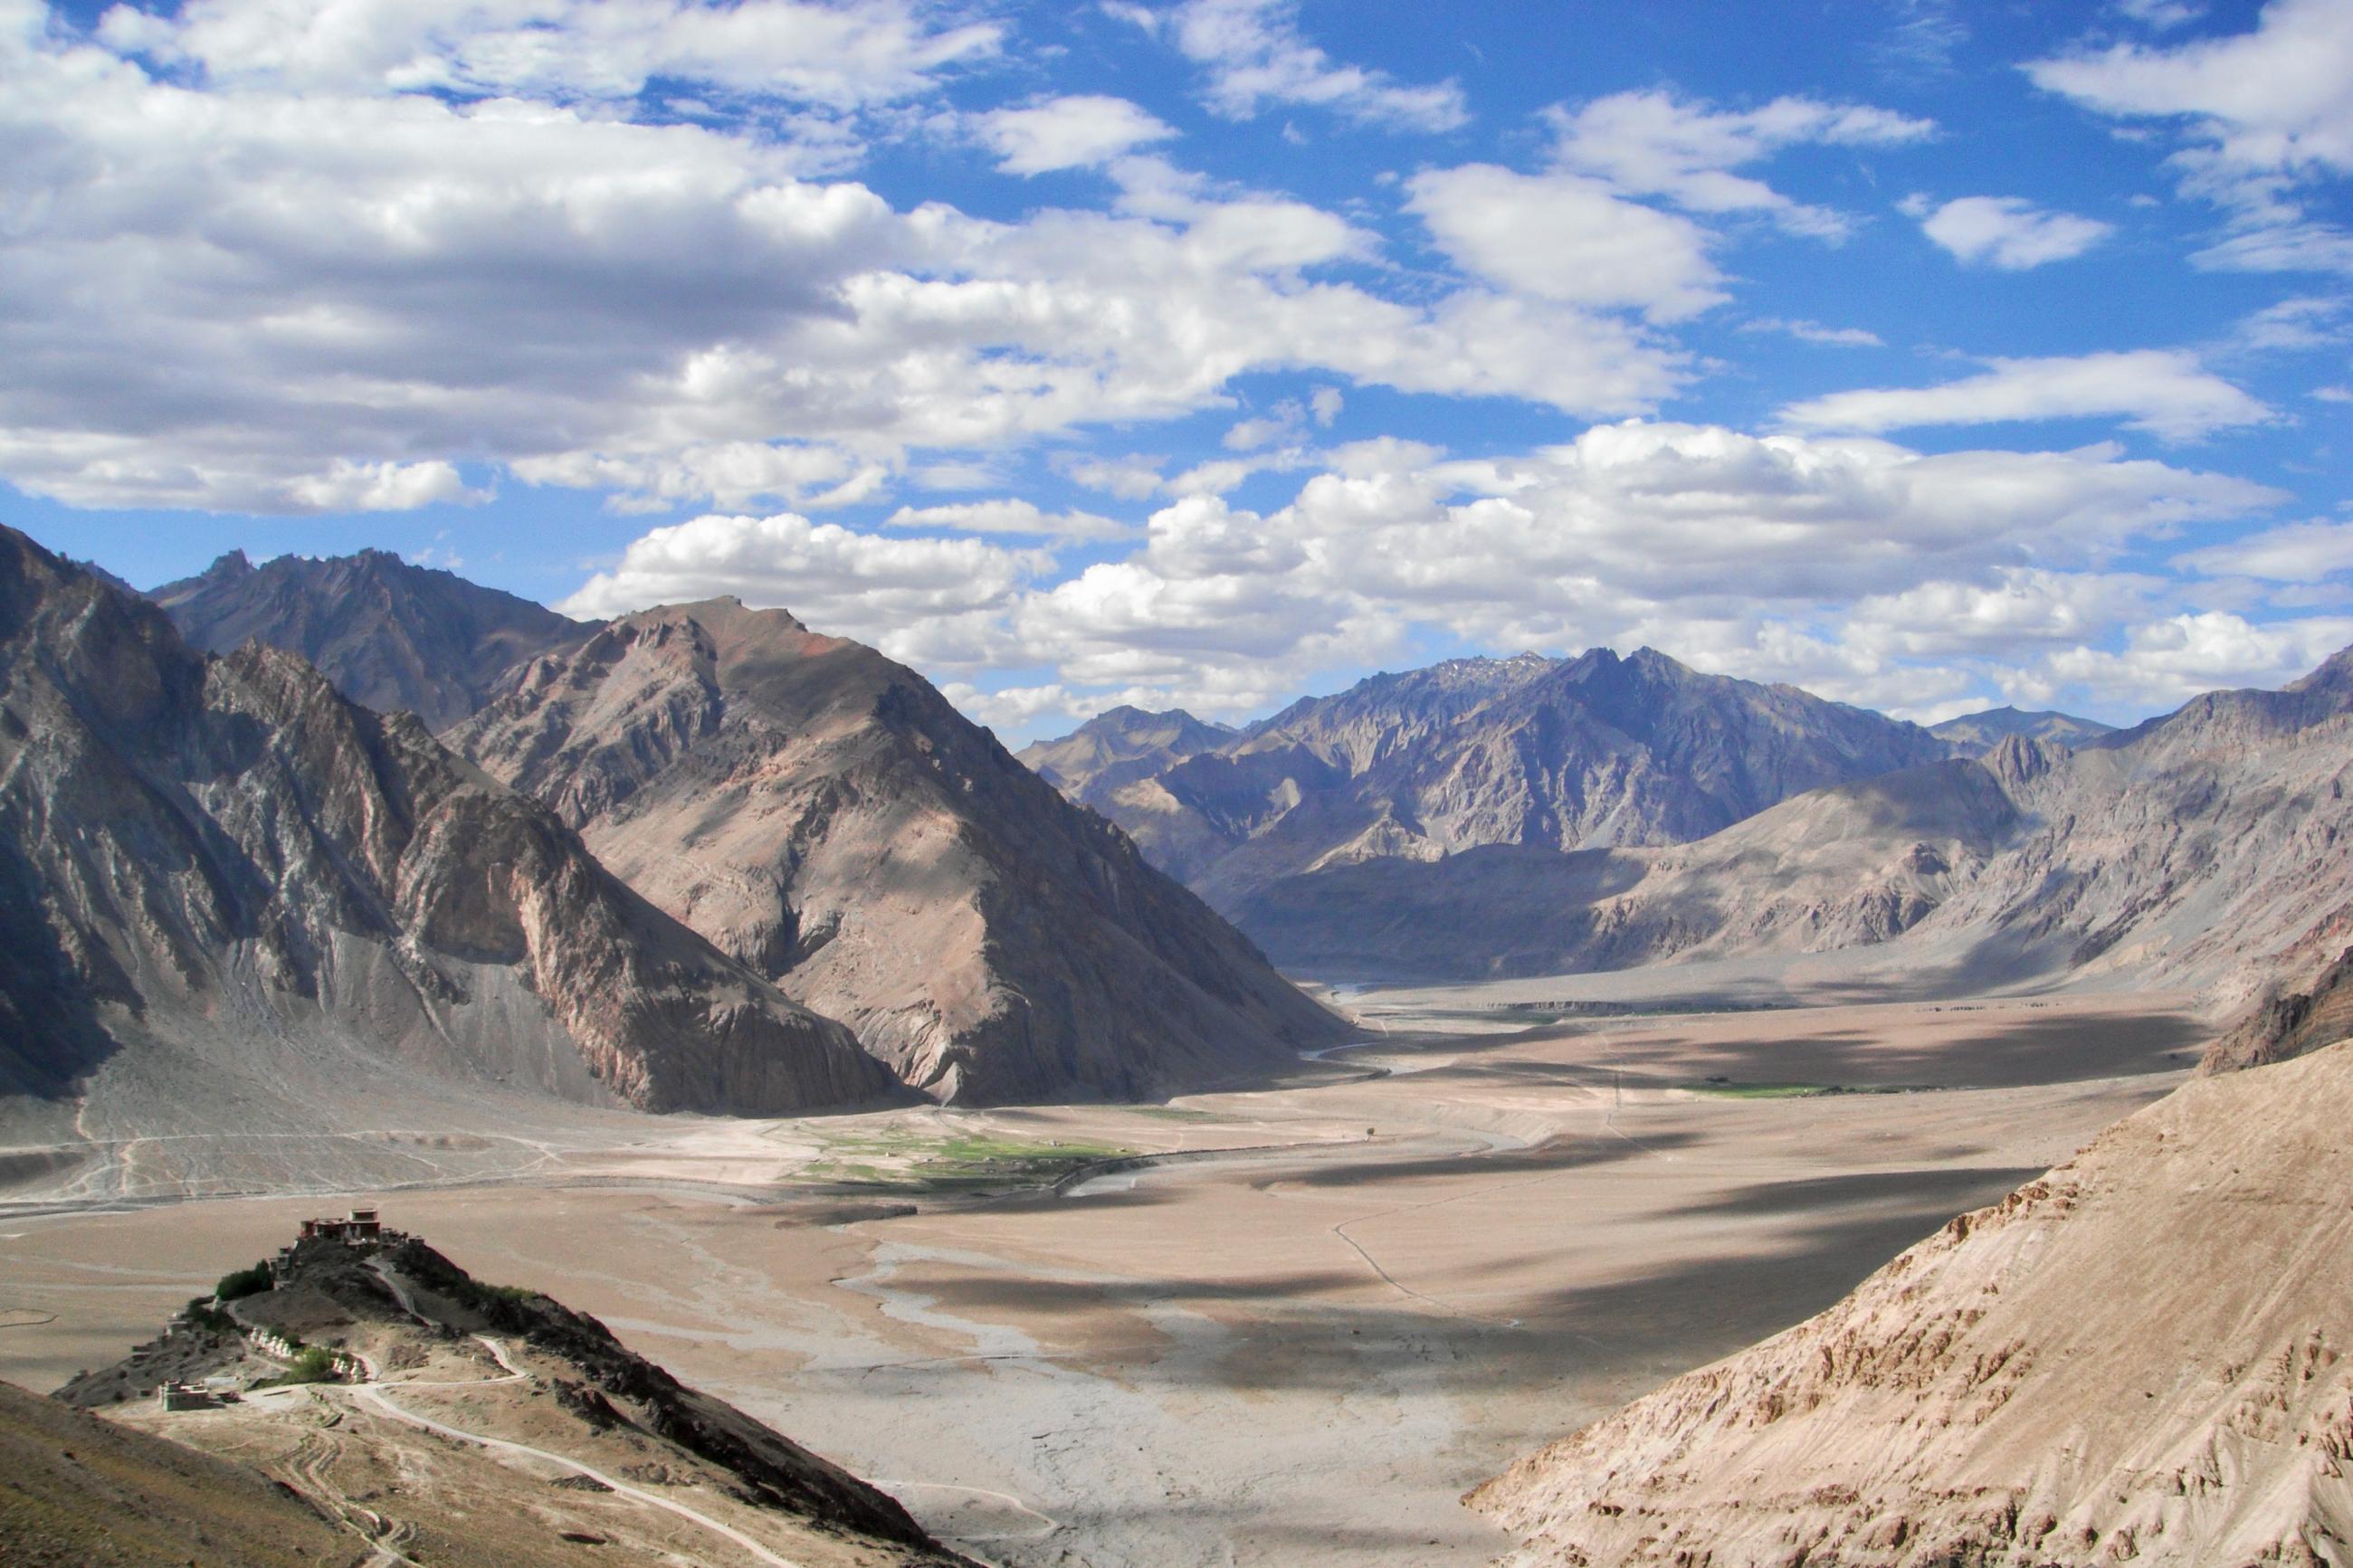 White clouds in a bright blue sky above the Himalaya Mountains and Zanskar Valley